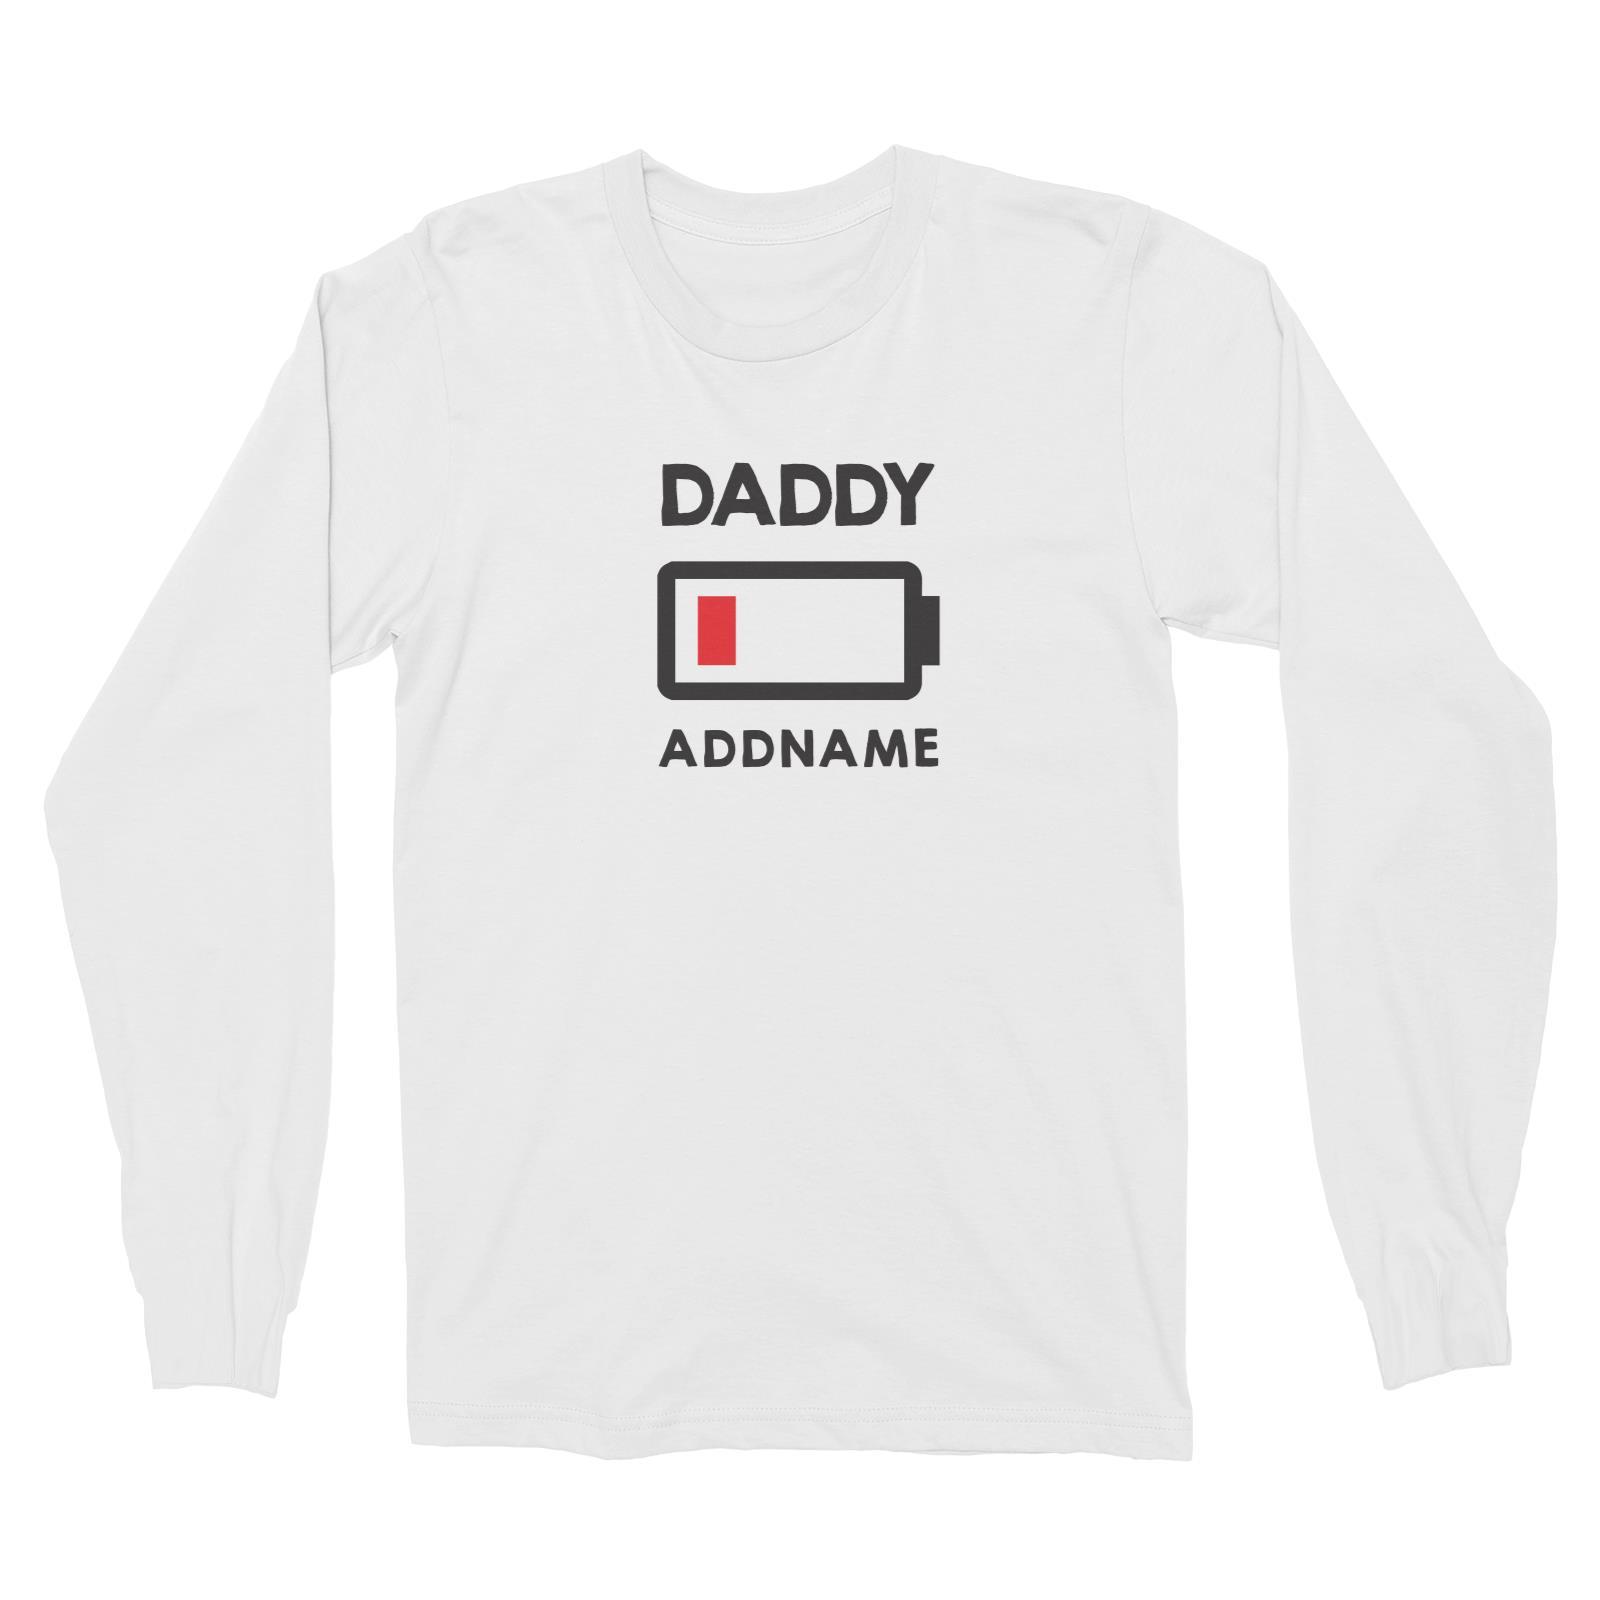 Battery Low Daddy Addname Long Sleeve Unisex T-Shirt  Matching Family Personalizable Designs